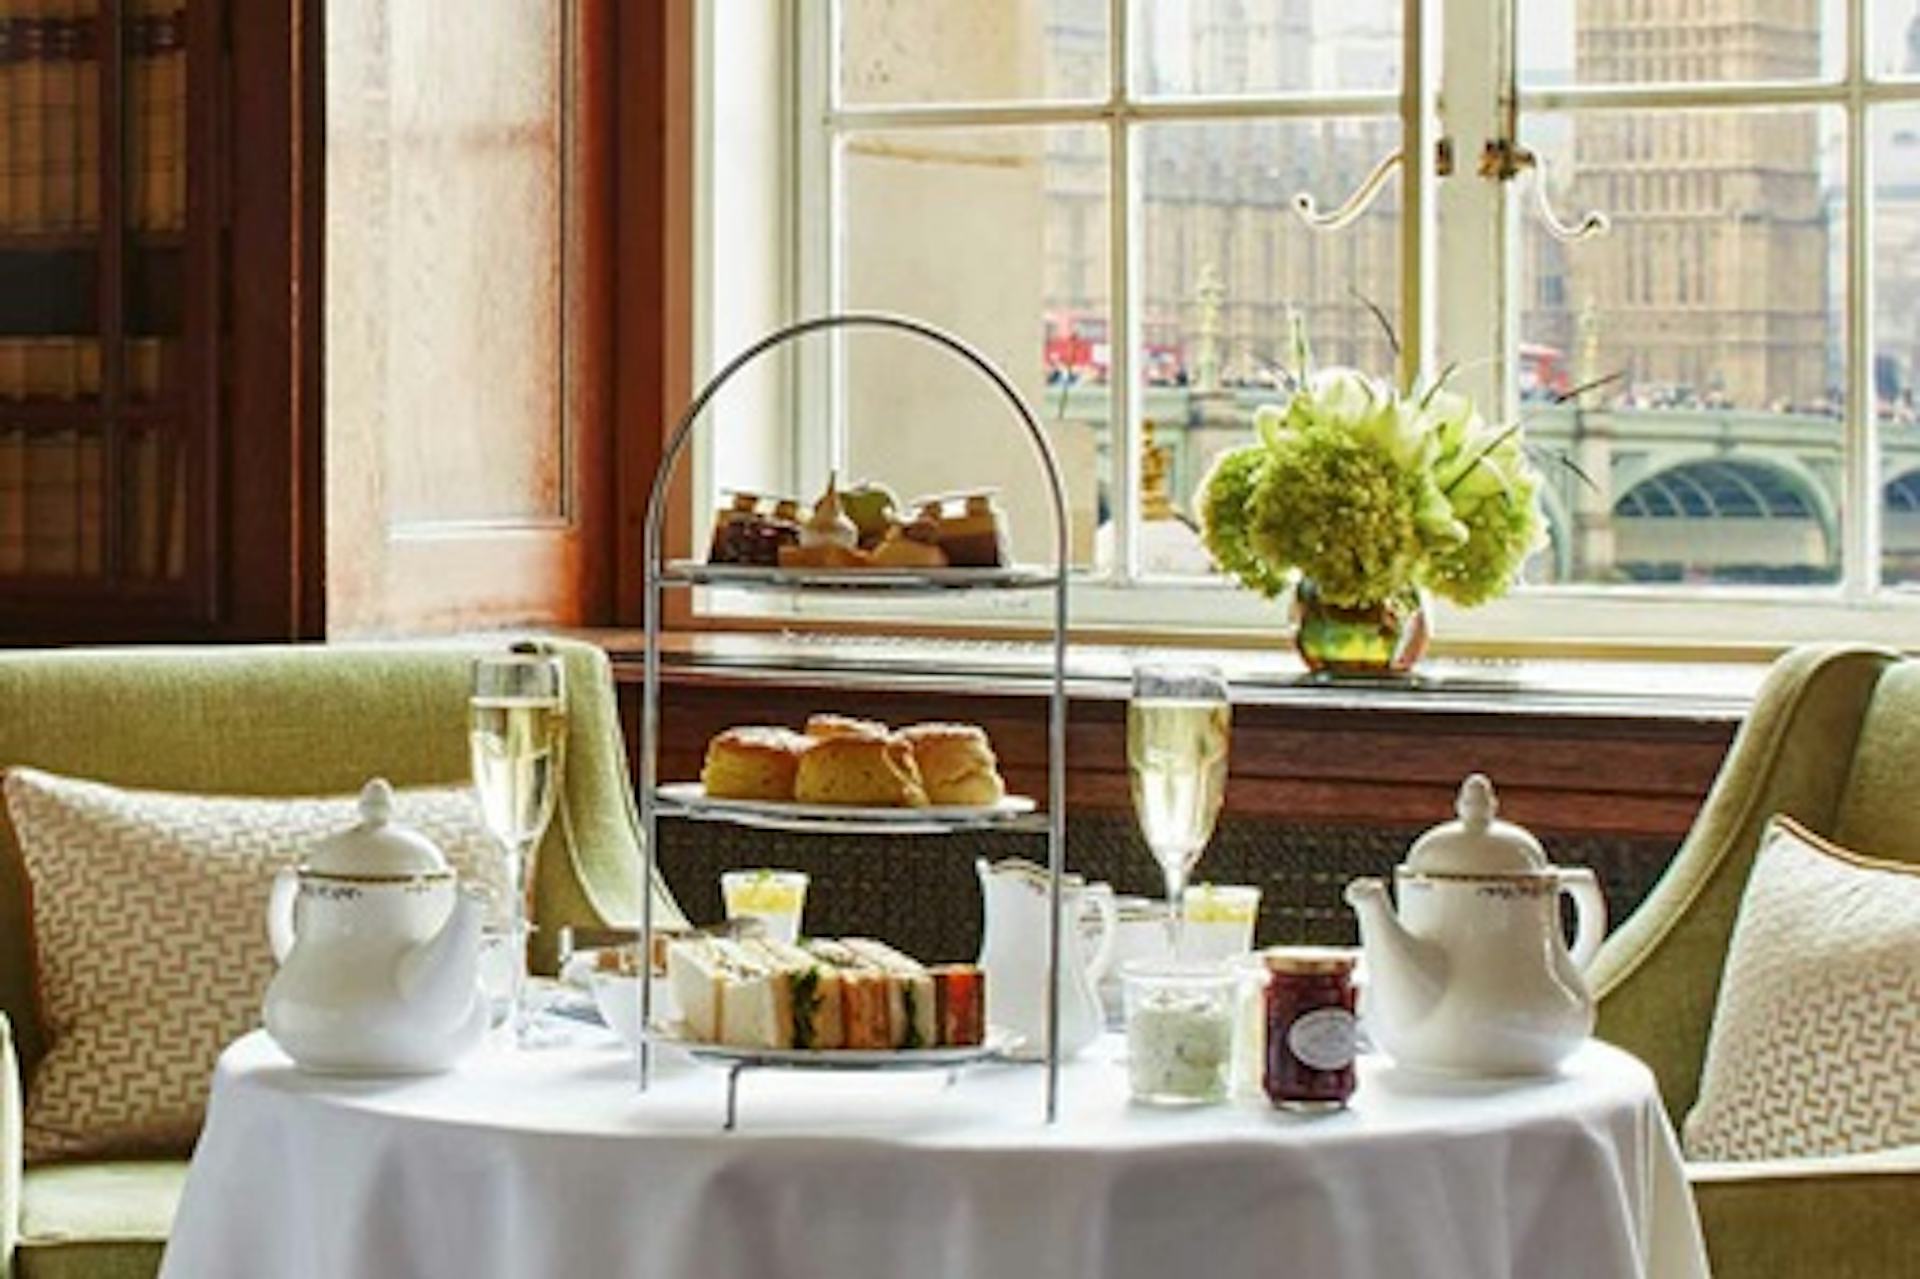 Free-Flowing Bubbles Afternoon Tea for Two at The County Hall Hotel, London